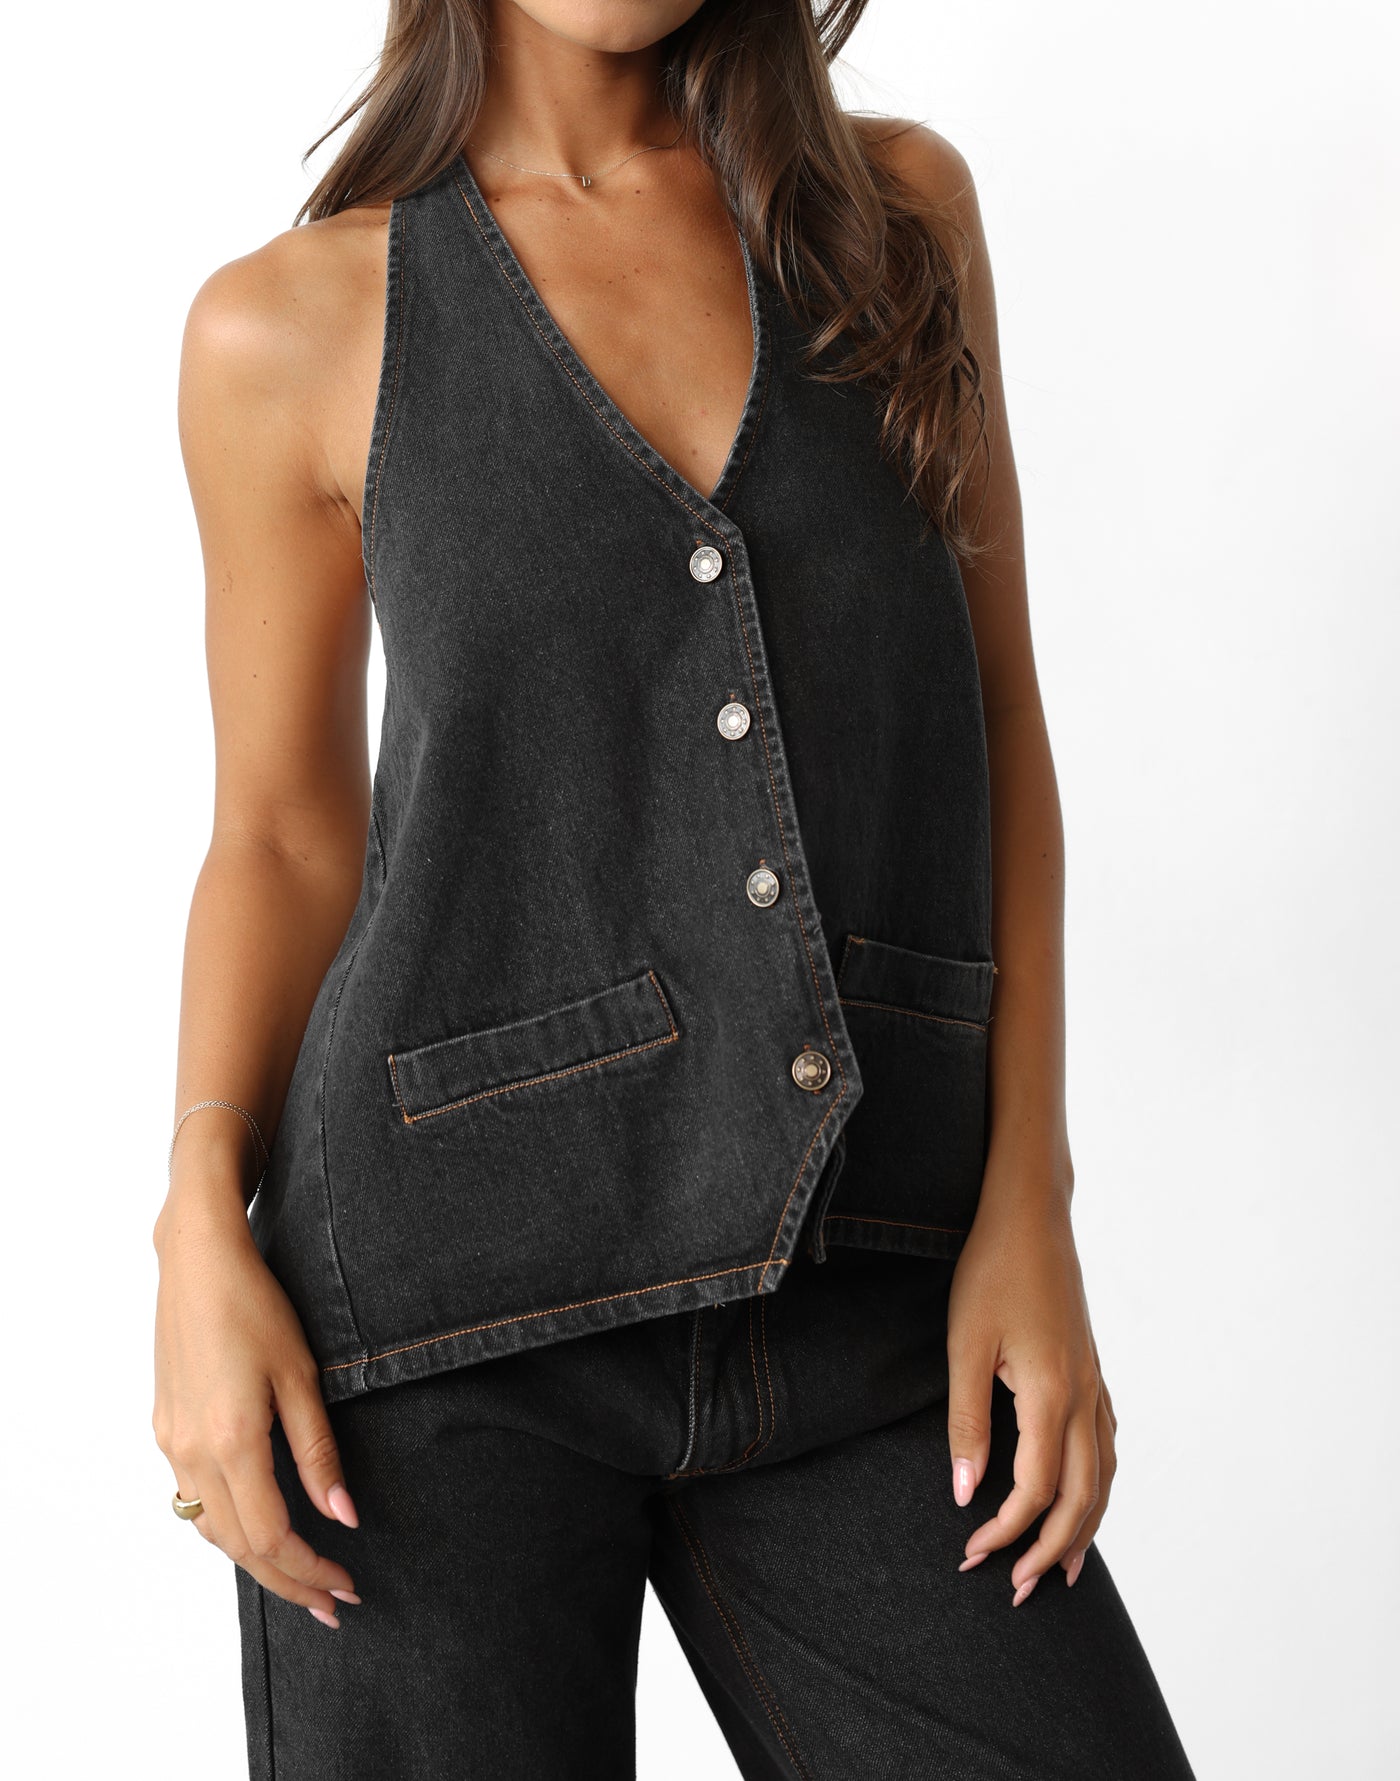 Hills Halter (Charcoal) - By Lioness - - Women's Top - Charcoal Clothing